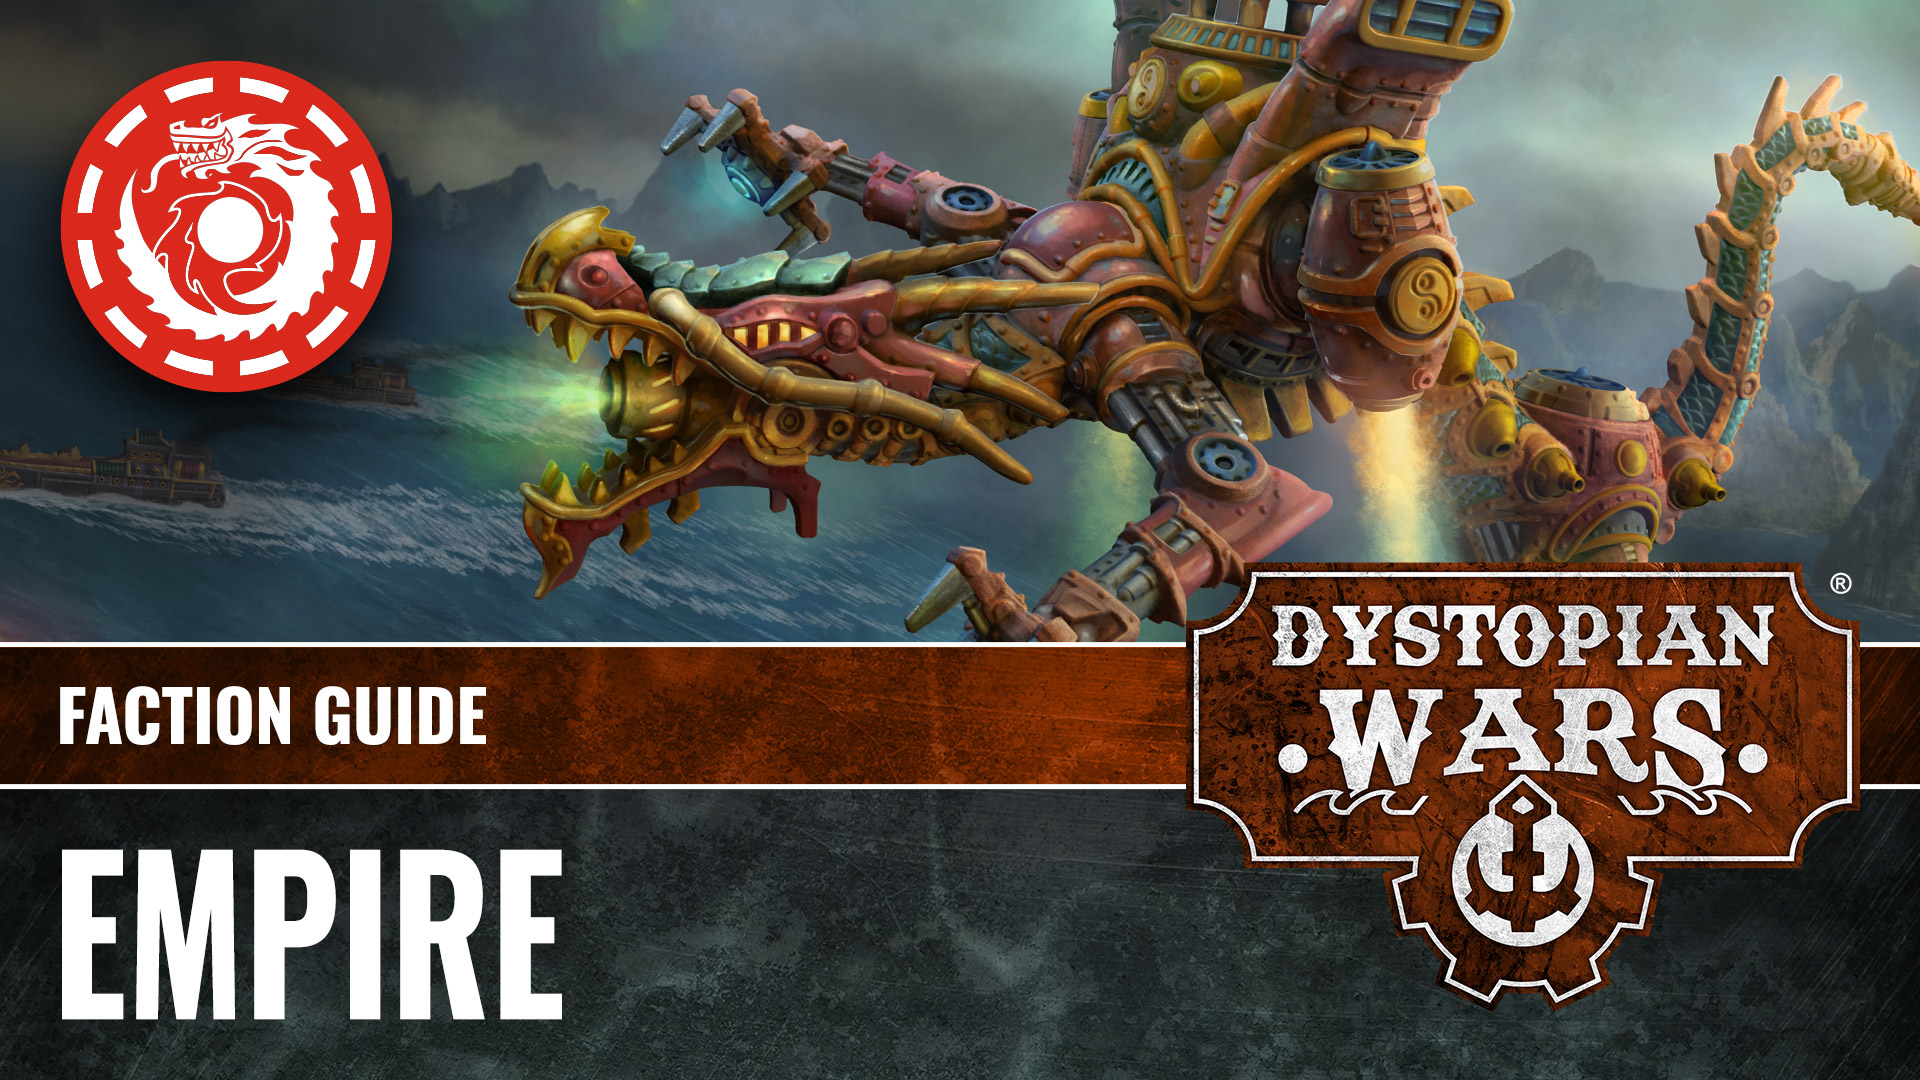 EMPIRE-Lore-Of-Dystopian-Wars-Faction-Guide